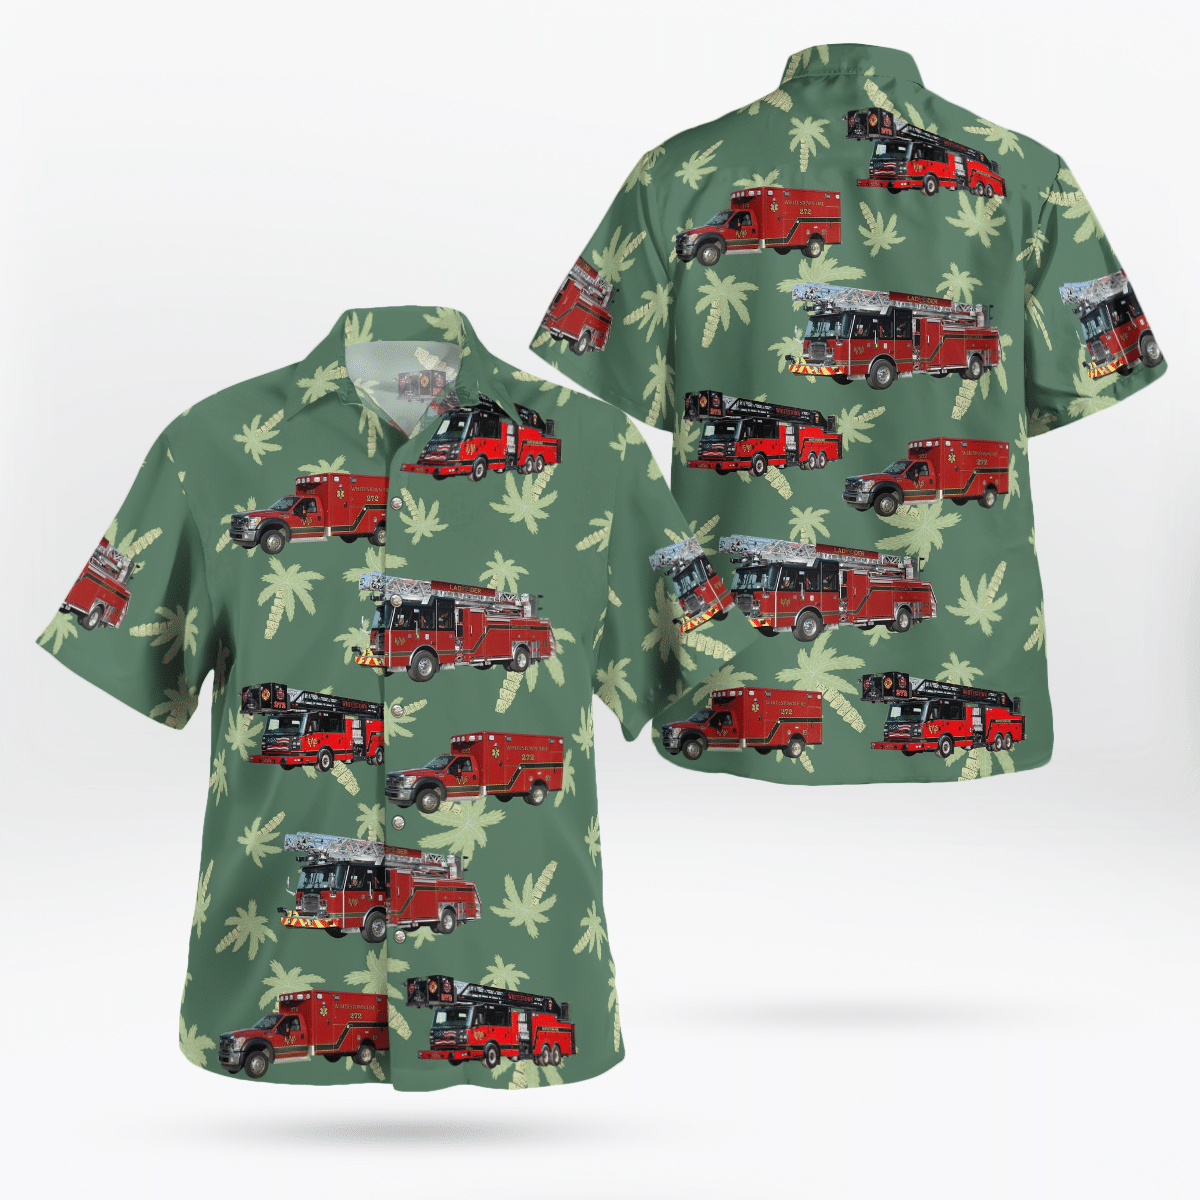 If you are in need of a new summertime look, pick up this Hawaiian shirt 57